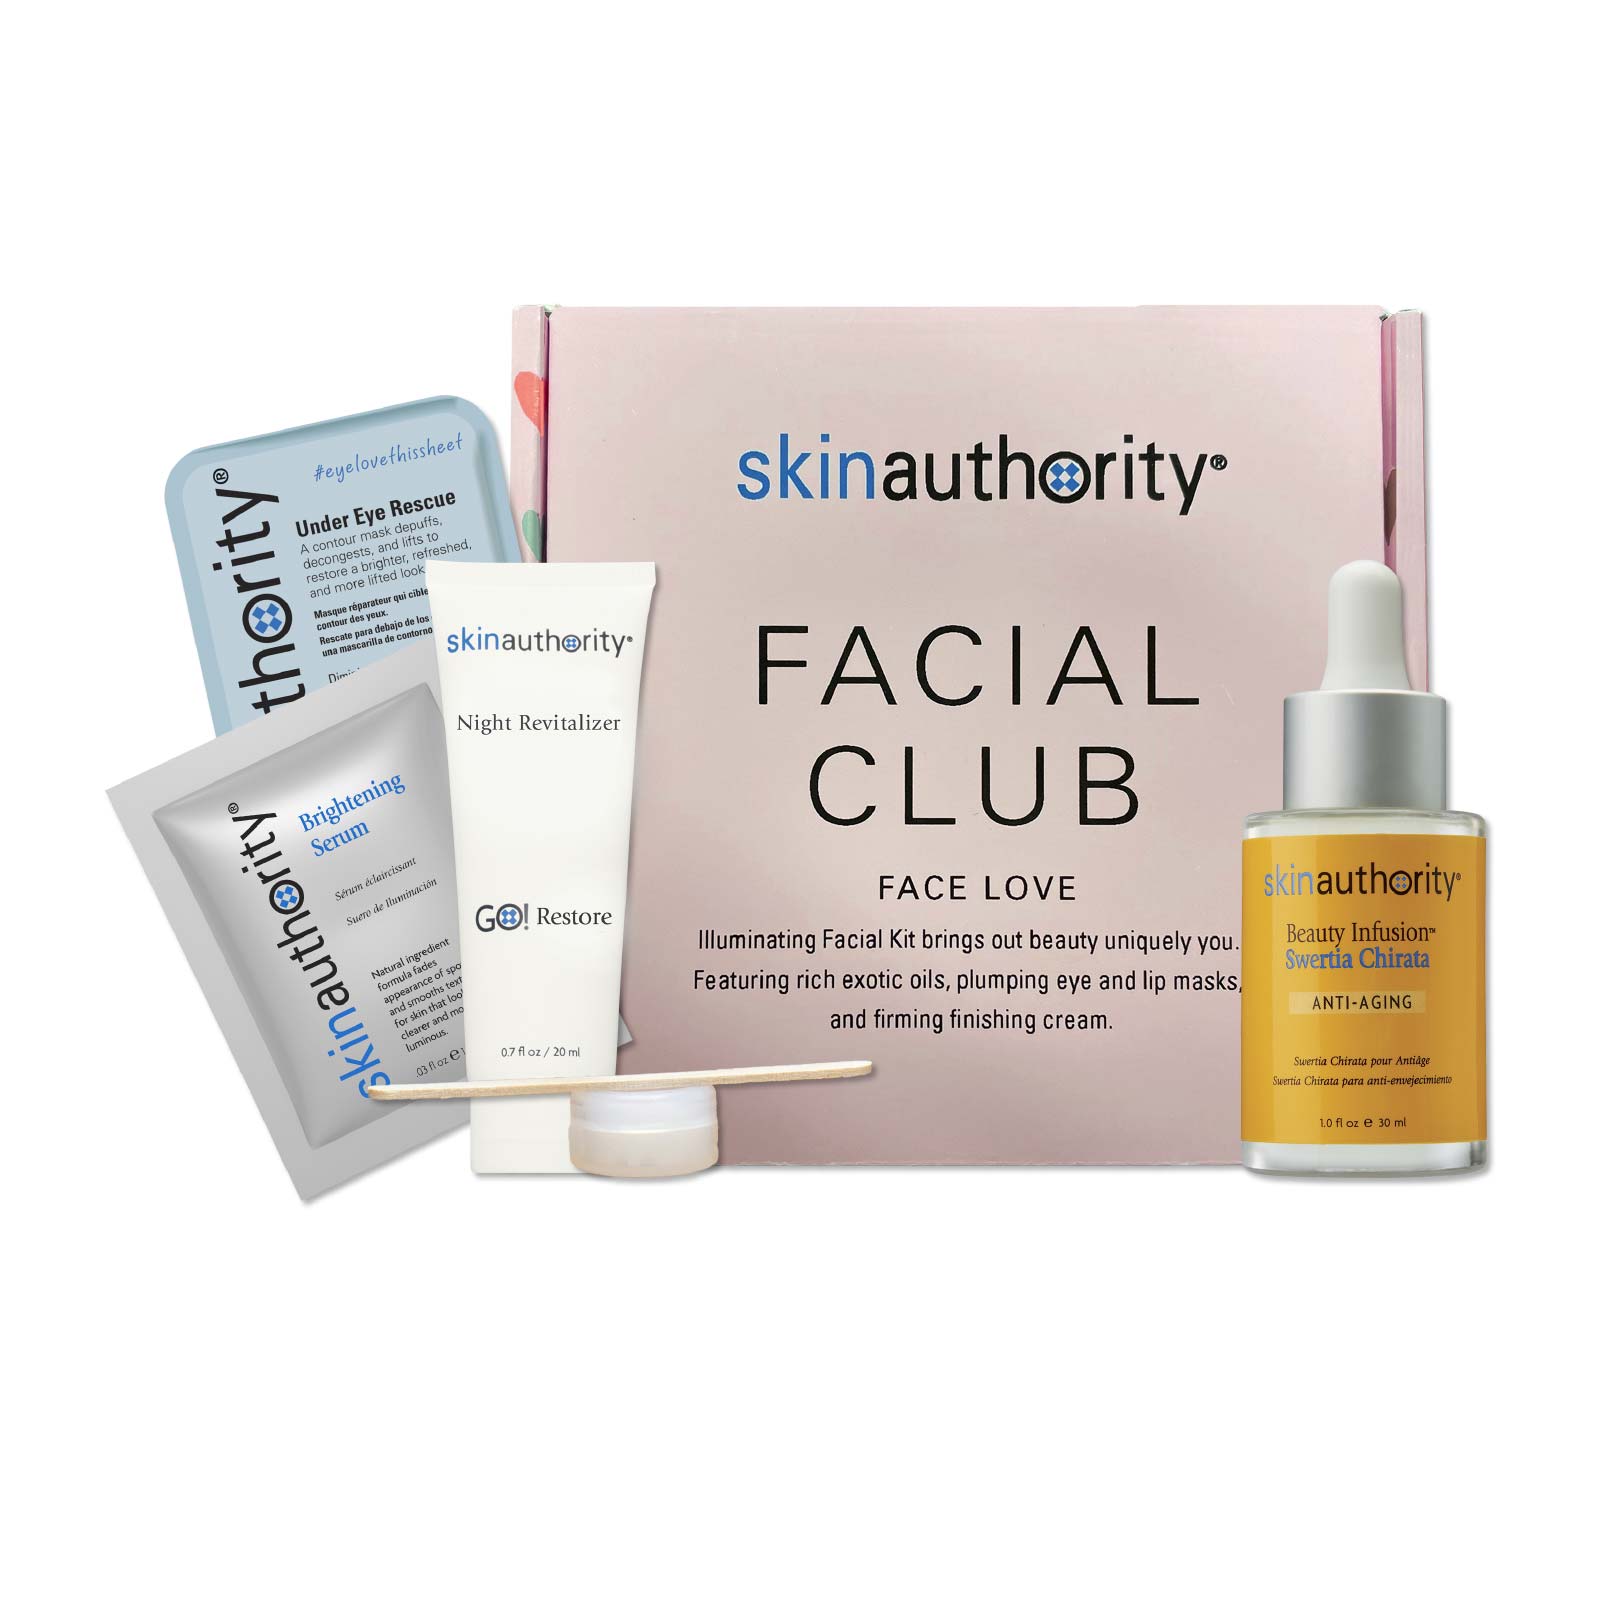 Face Love Kit Contents